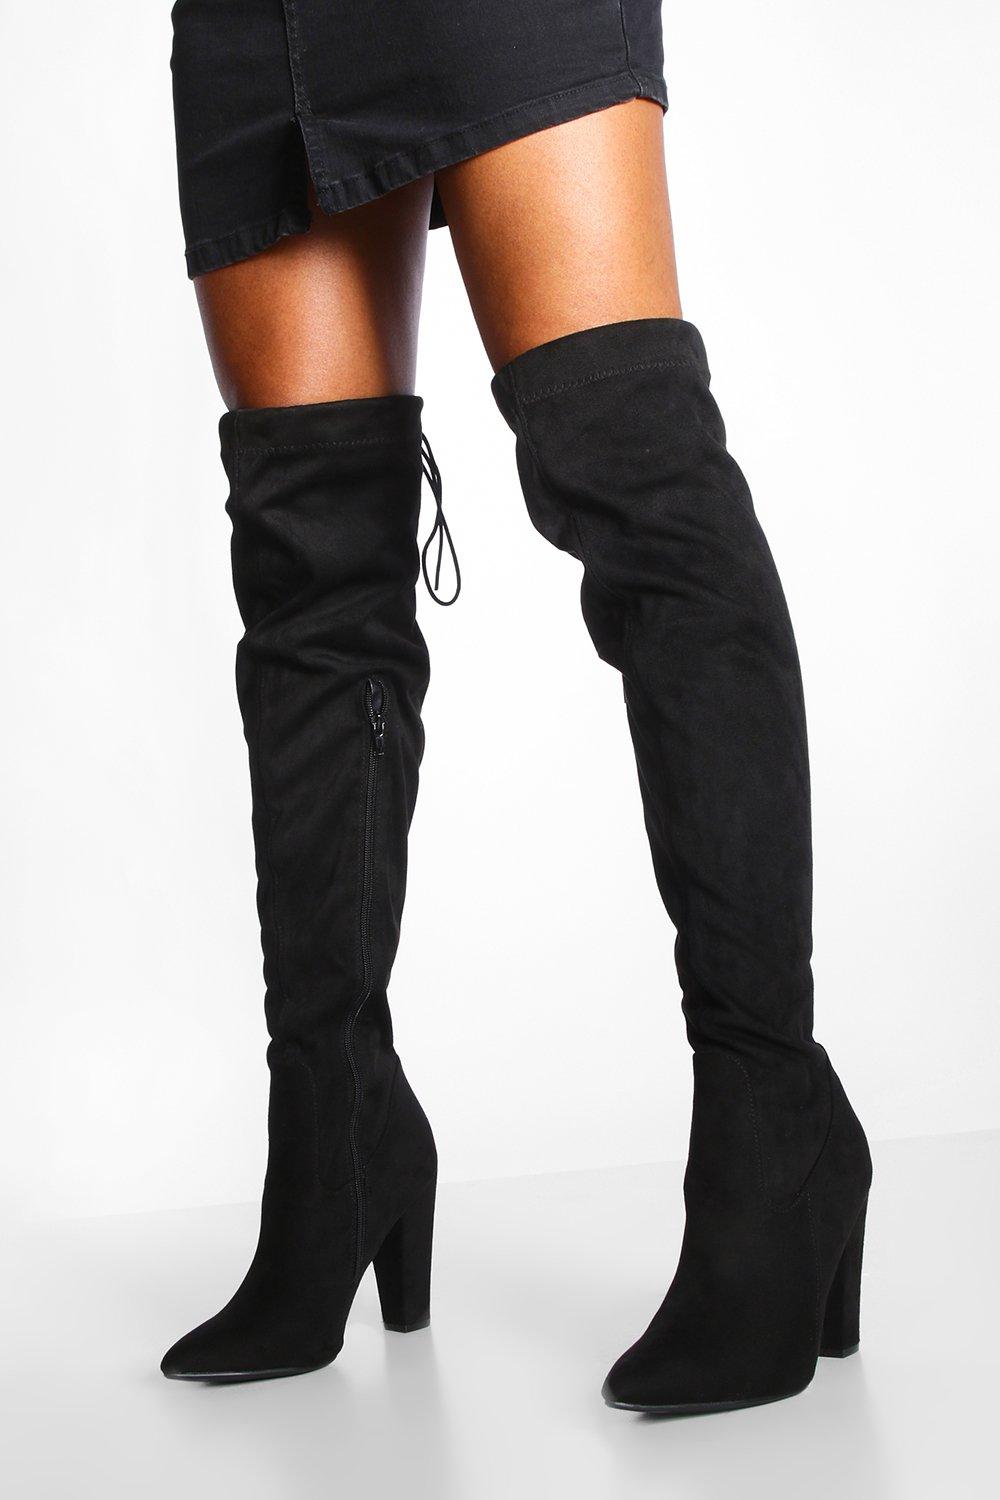 over the knee boots with tie